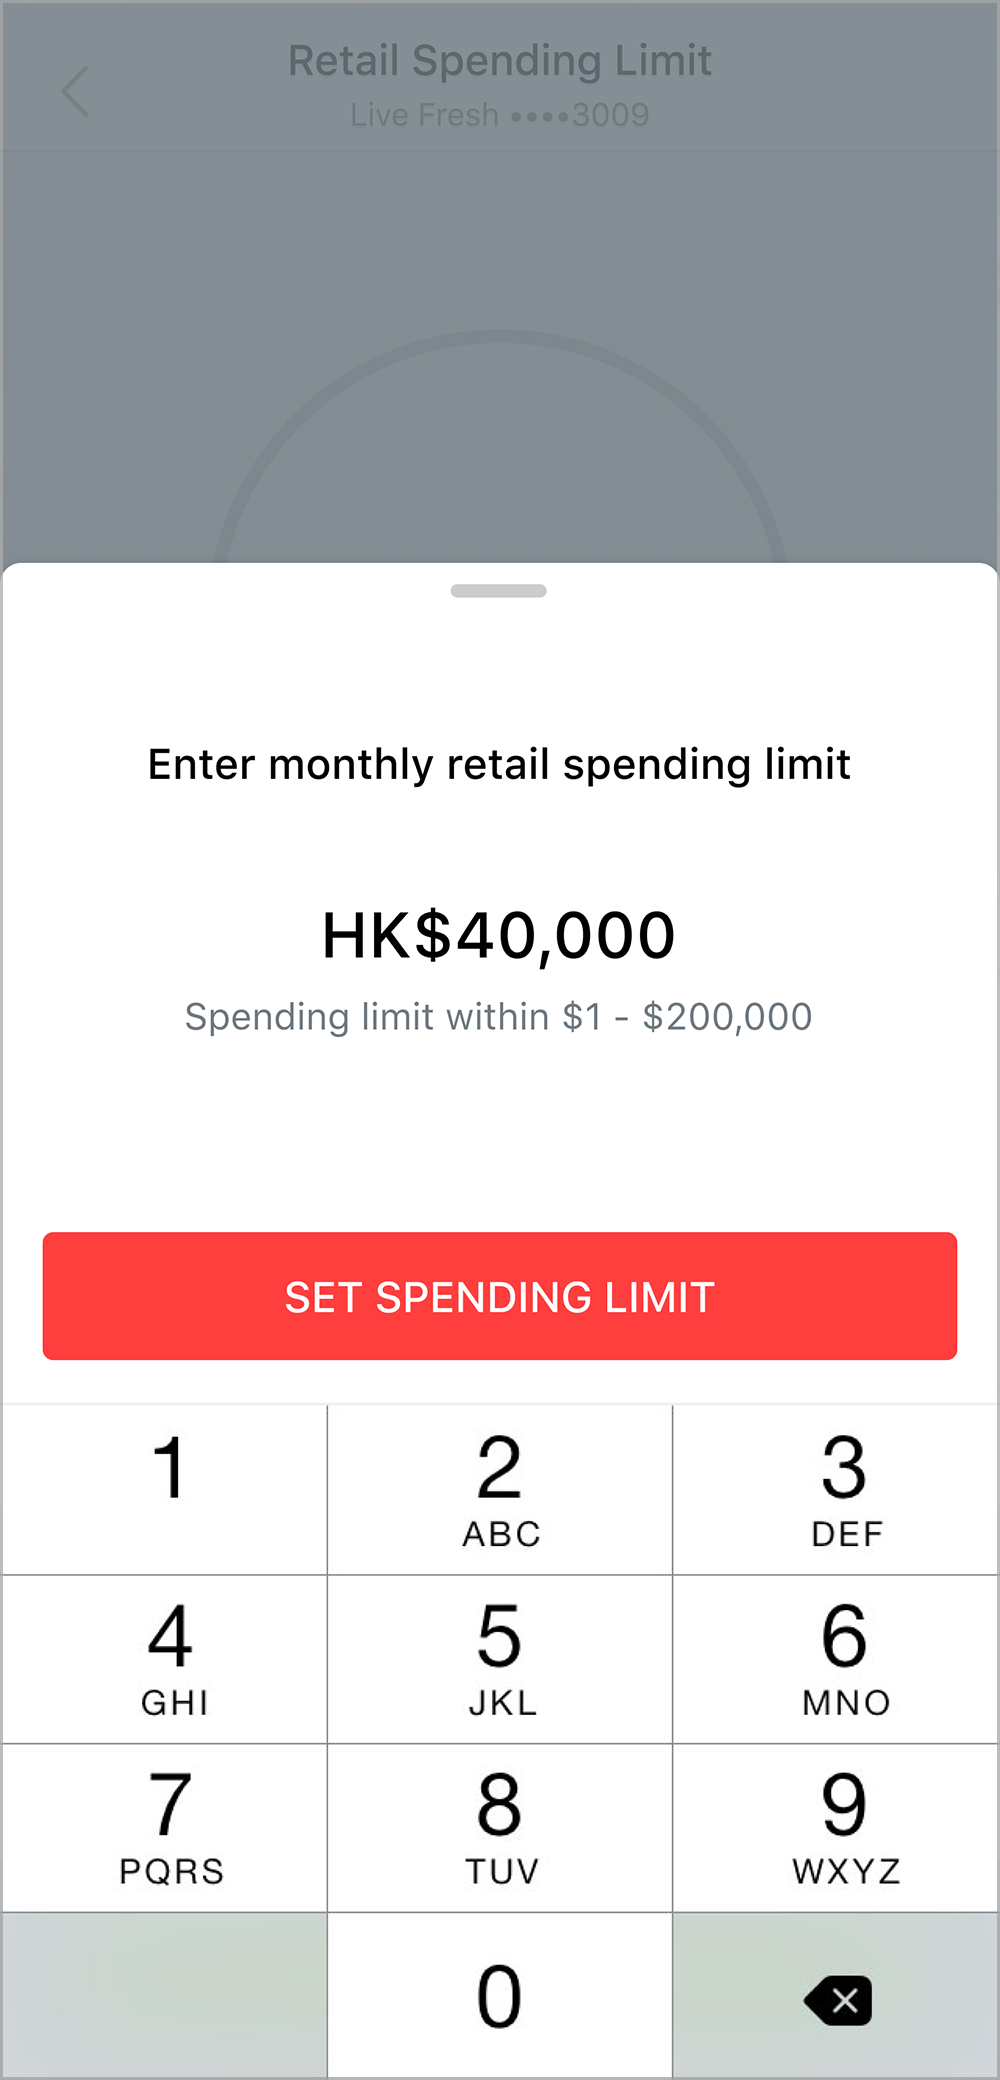 Input your preferred spending limit and tap on “Set Spending Limit”